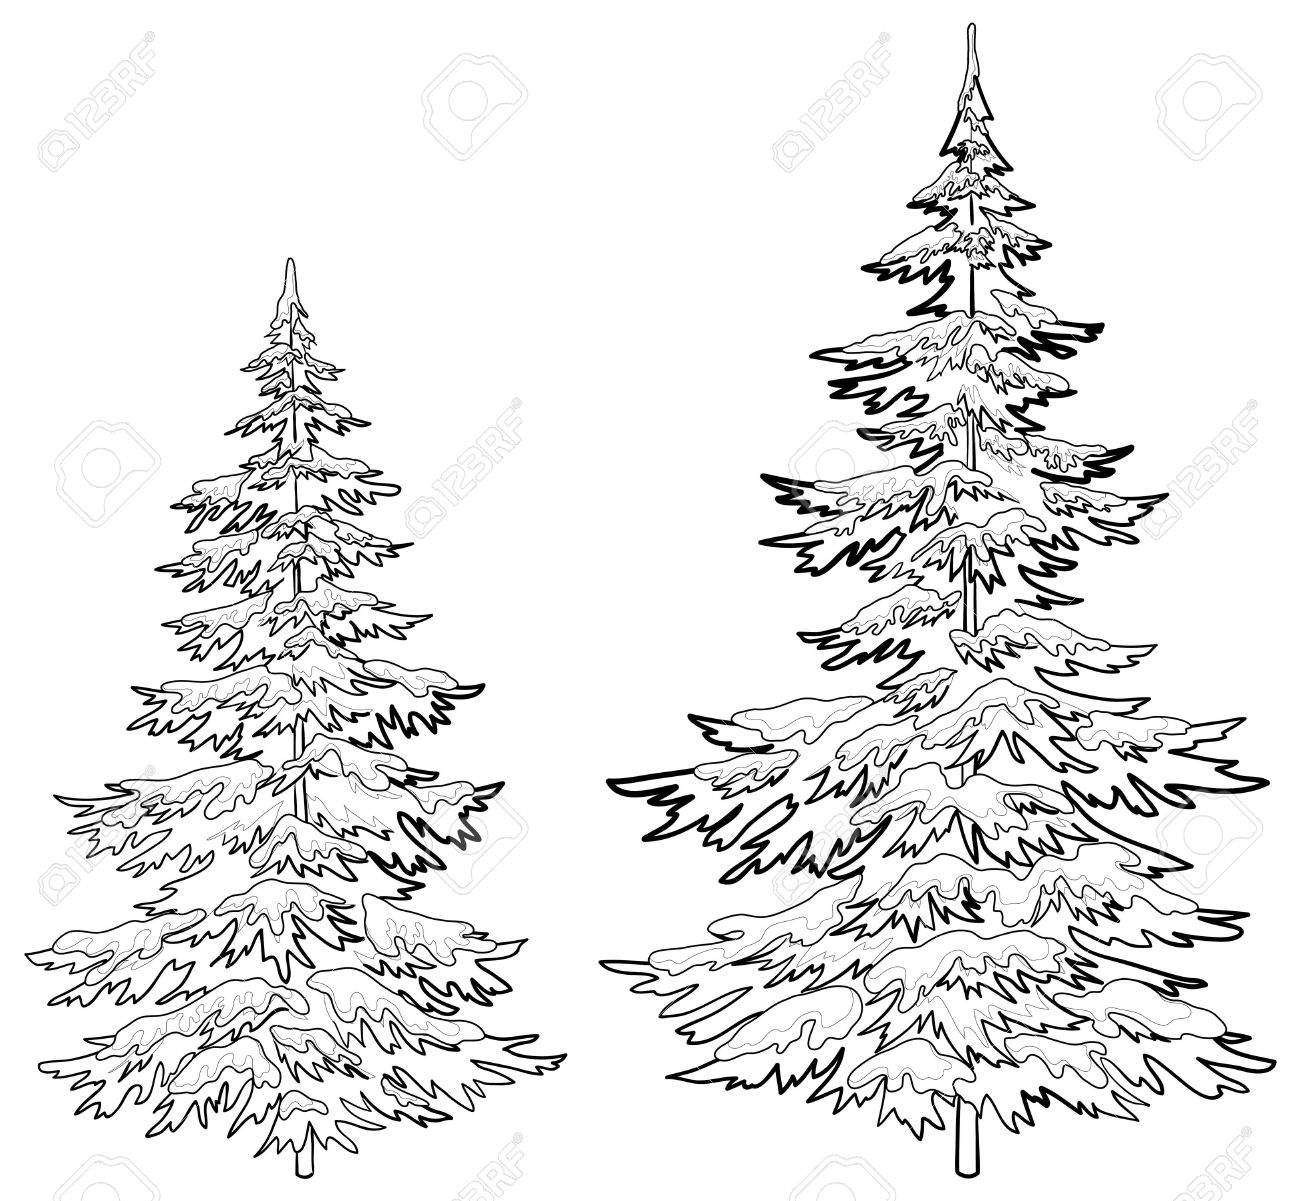 239 Cute White Pine Tree Coloring Page with Animal character